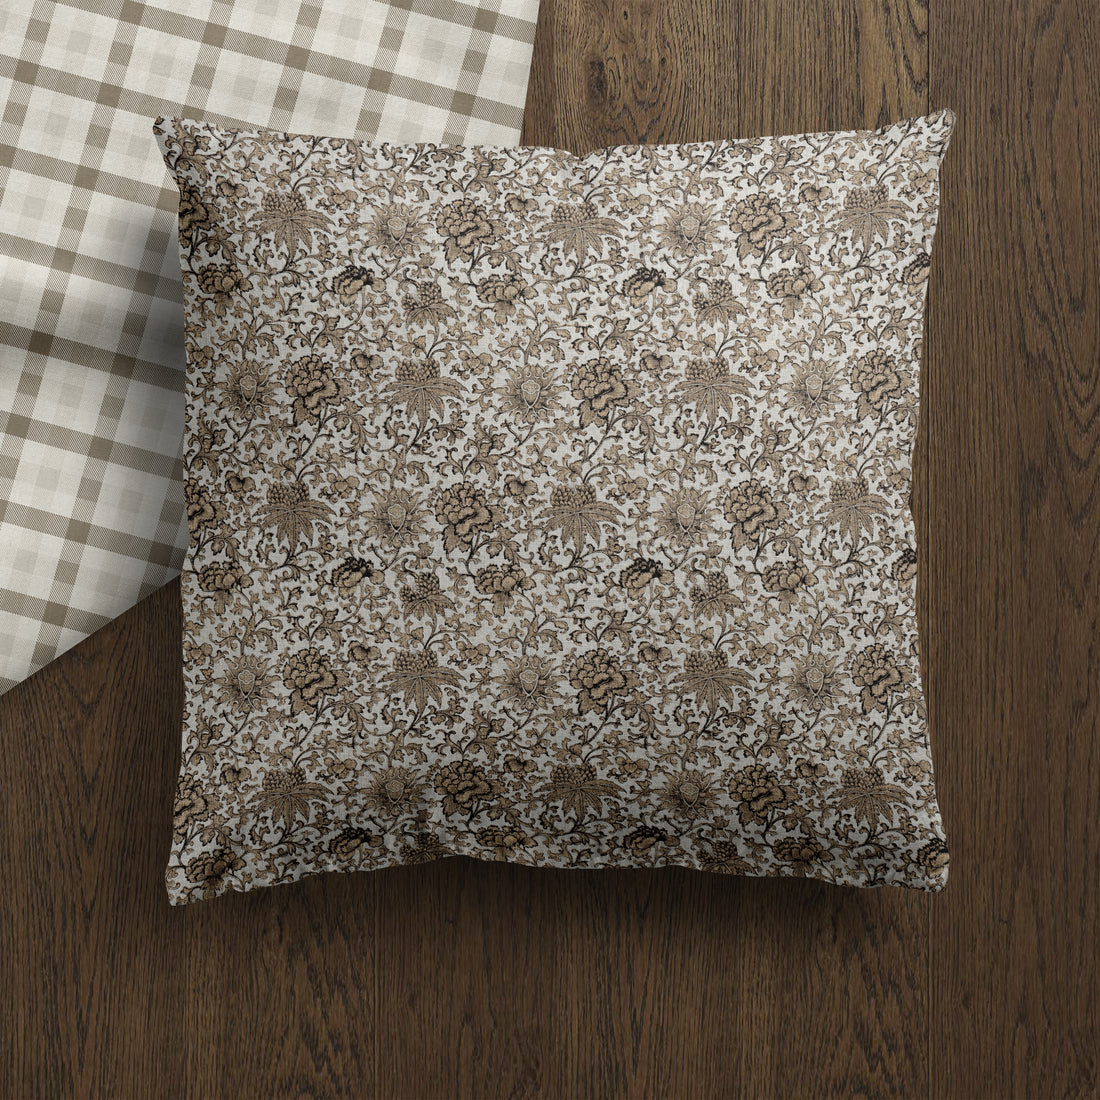 Timeless Blooms III Vintage Floral Pillow Cover